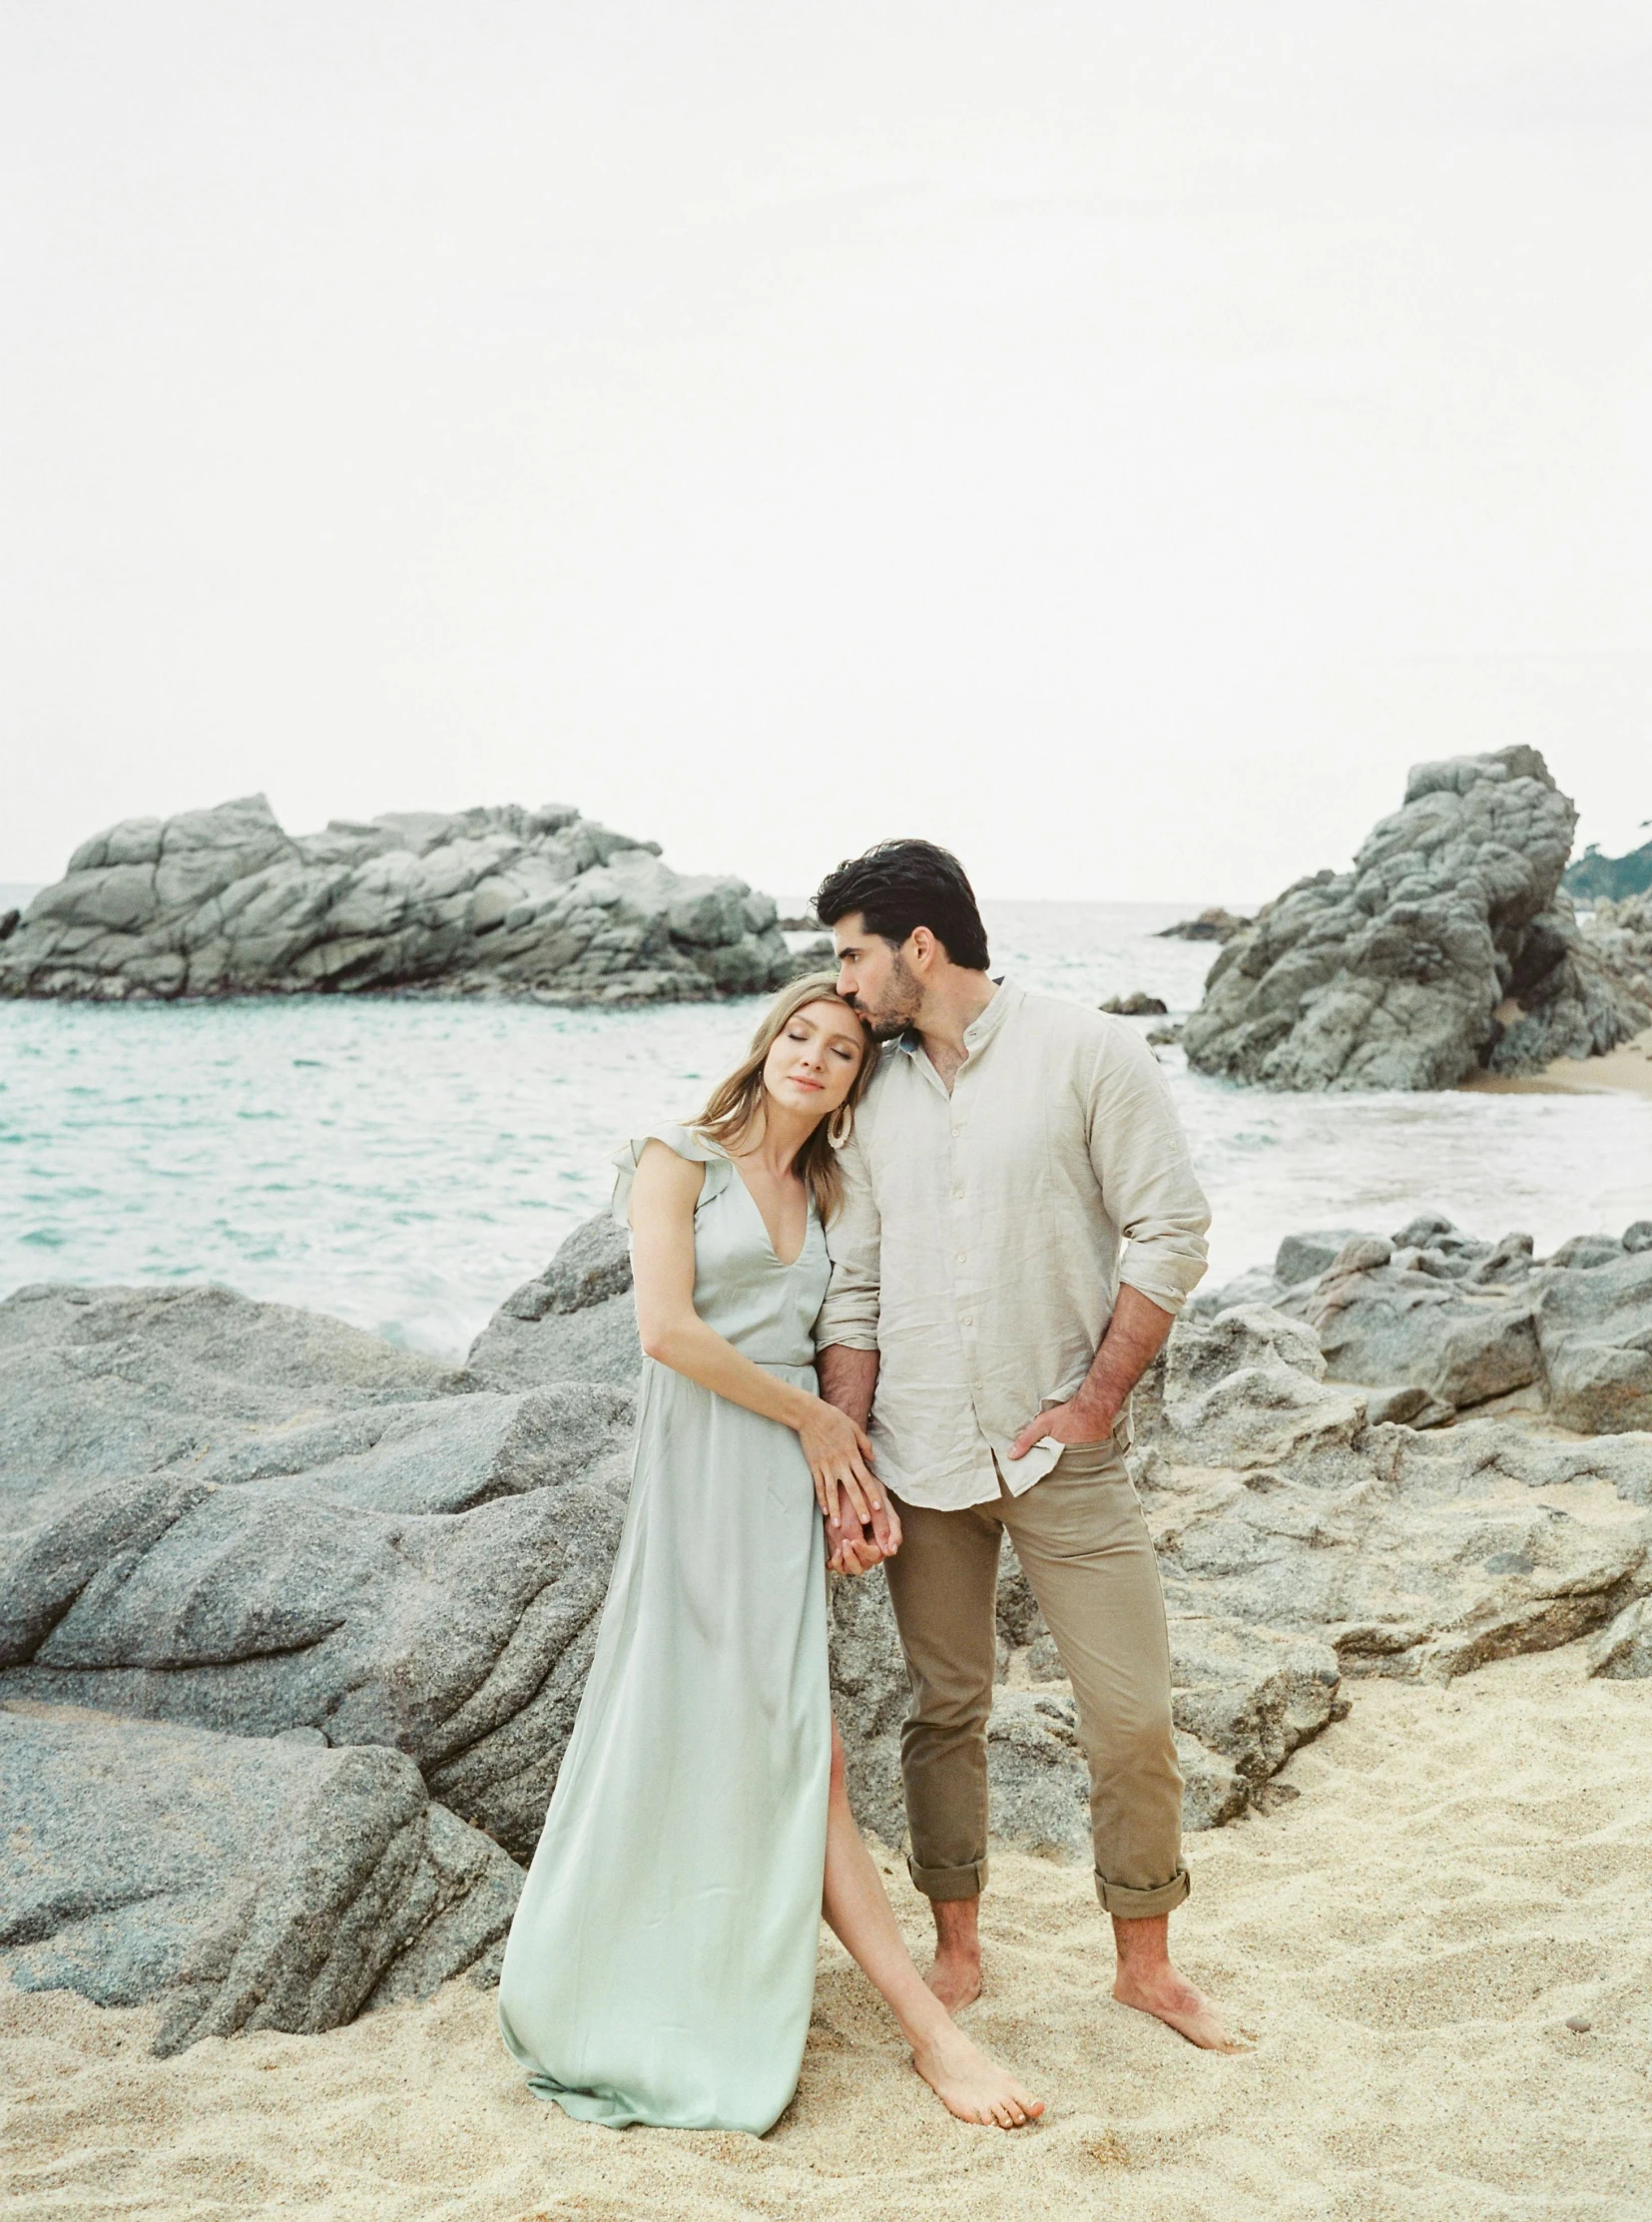 a man and woman standing next to each other on a beach, a picture, flowy hair standing on a rock, light grey backdrop, greece, instagram photo